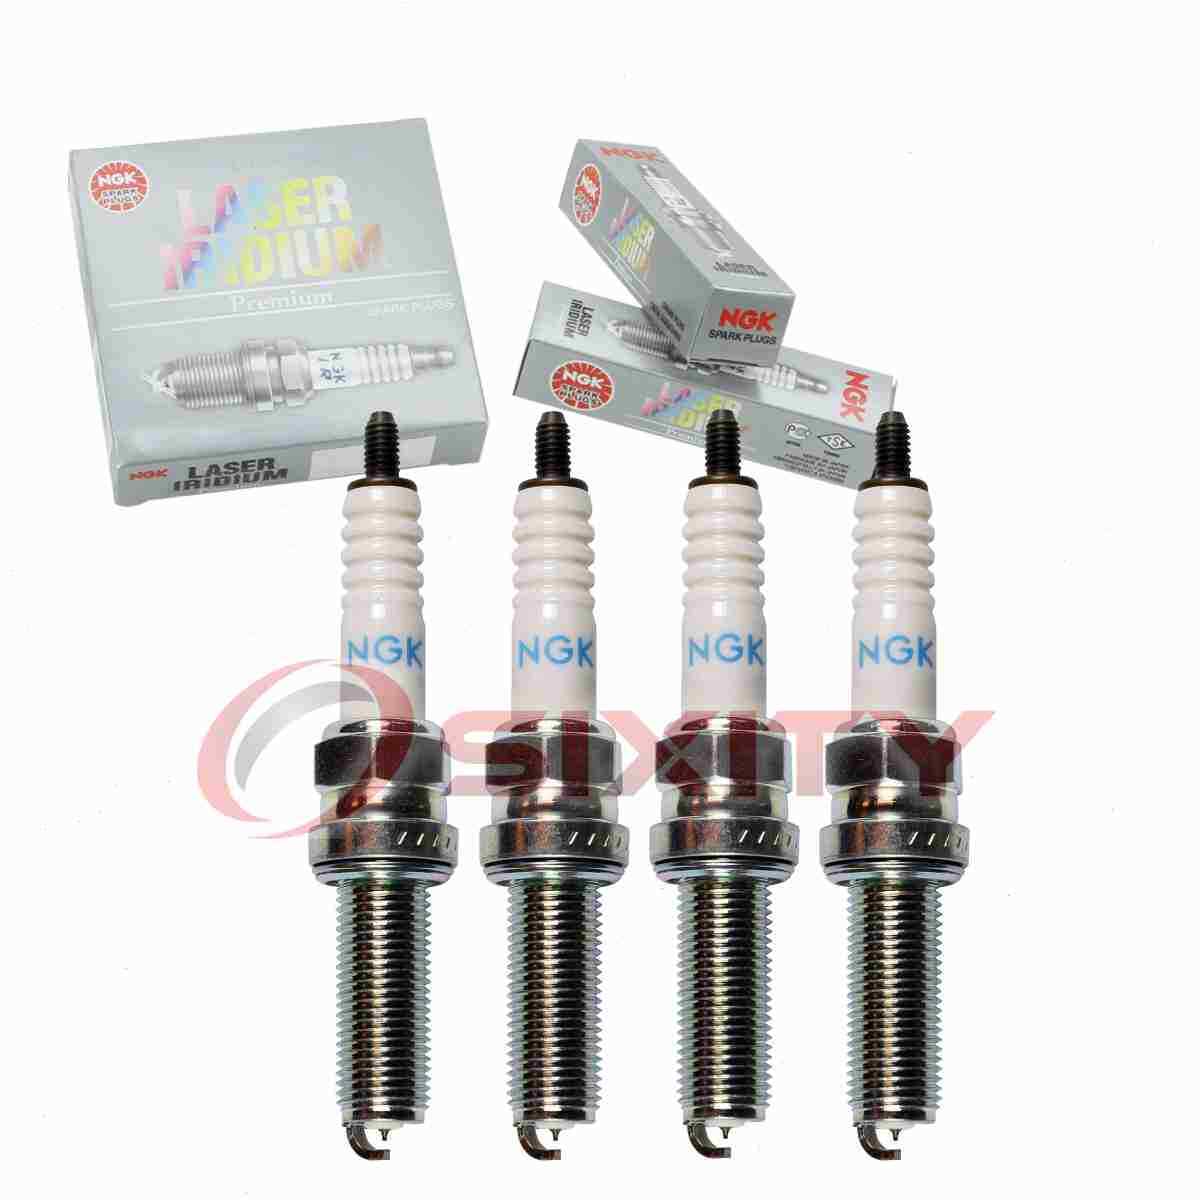 4 pc NGK 95399 SILMAR9B9 Laser Iridium Spark Plugs for Ignition Wire zx